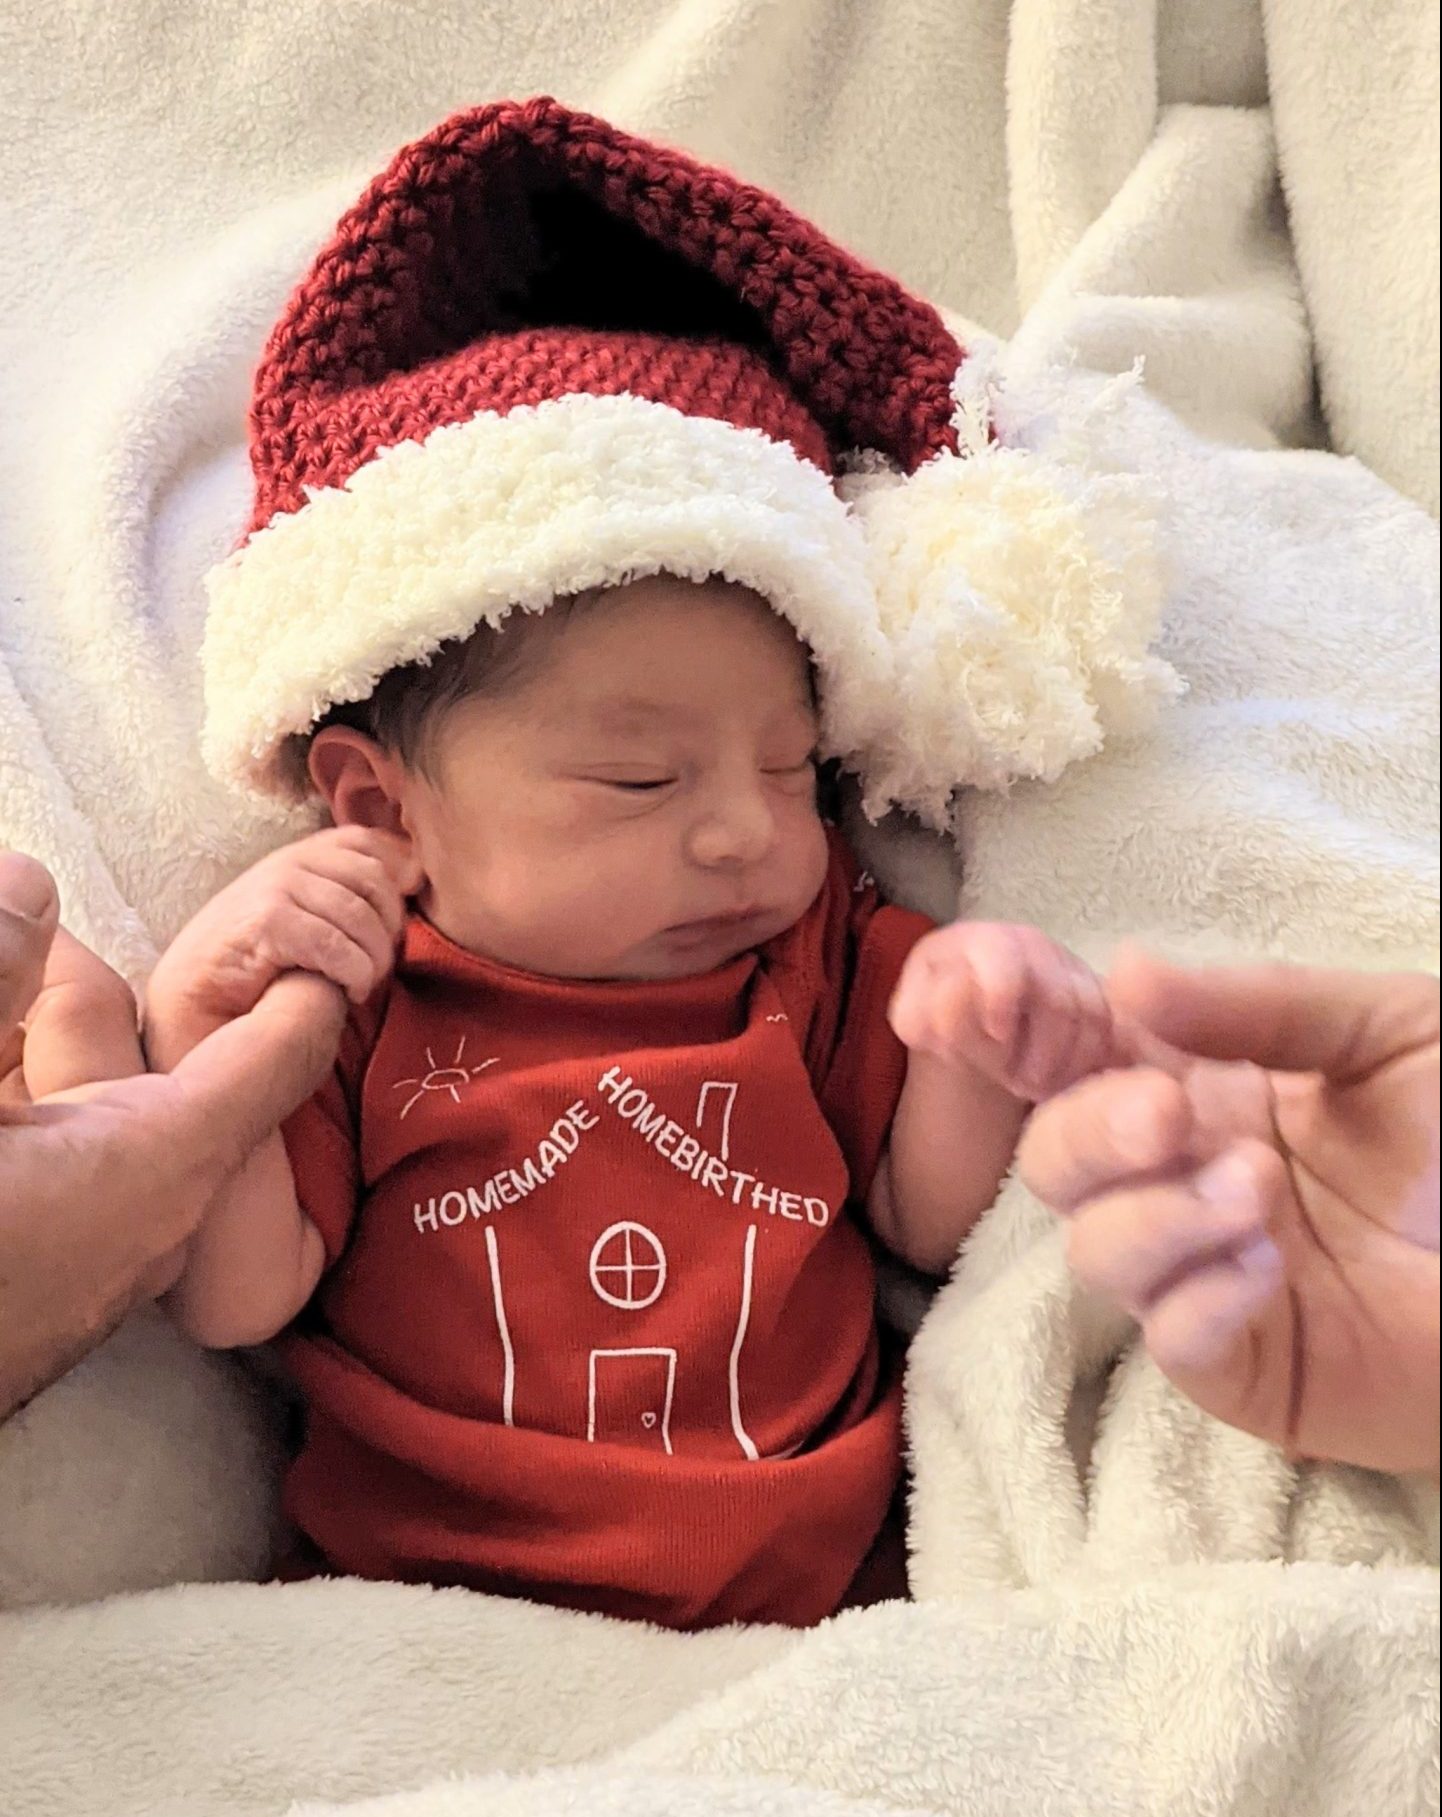 Newborn wearing a crochet santa hat, a onesie that says "Homemade Homebirthed". and holding onto two adult fingers.